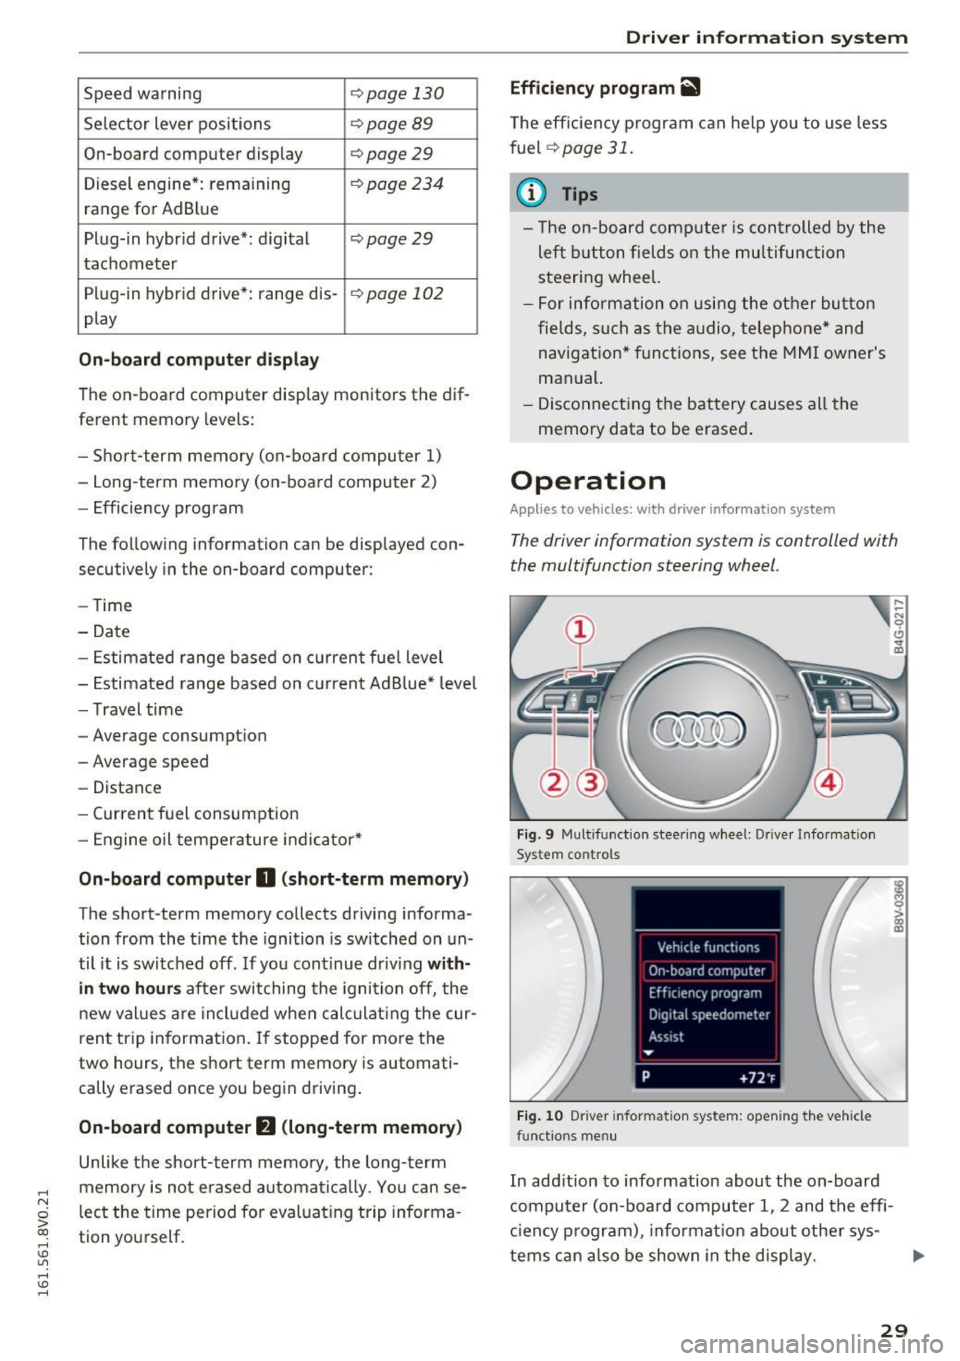 AUDI S3 2016  Owners Manual .... N 
0 > CX) 
rl I.Cl U"I 
rl I.Cl .... 
Speed  warning ¢page  130 
Selector  lever  positions C?page  89 
On-board  computer  display ¢page29 
Diesel  engine*:  remaining C?page 234 
range  for 